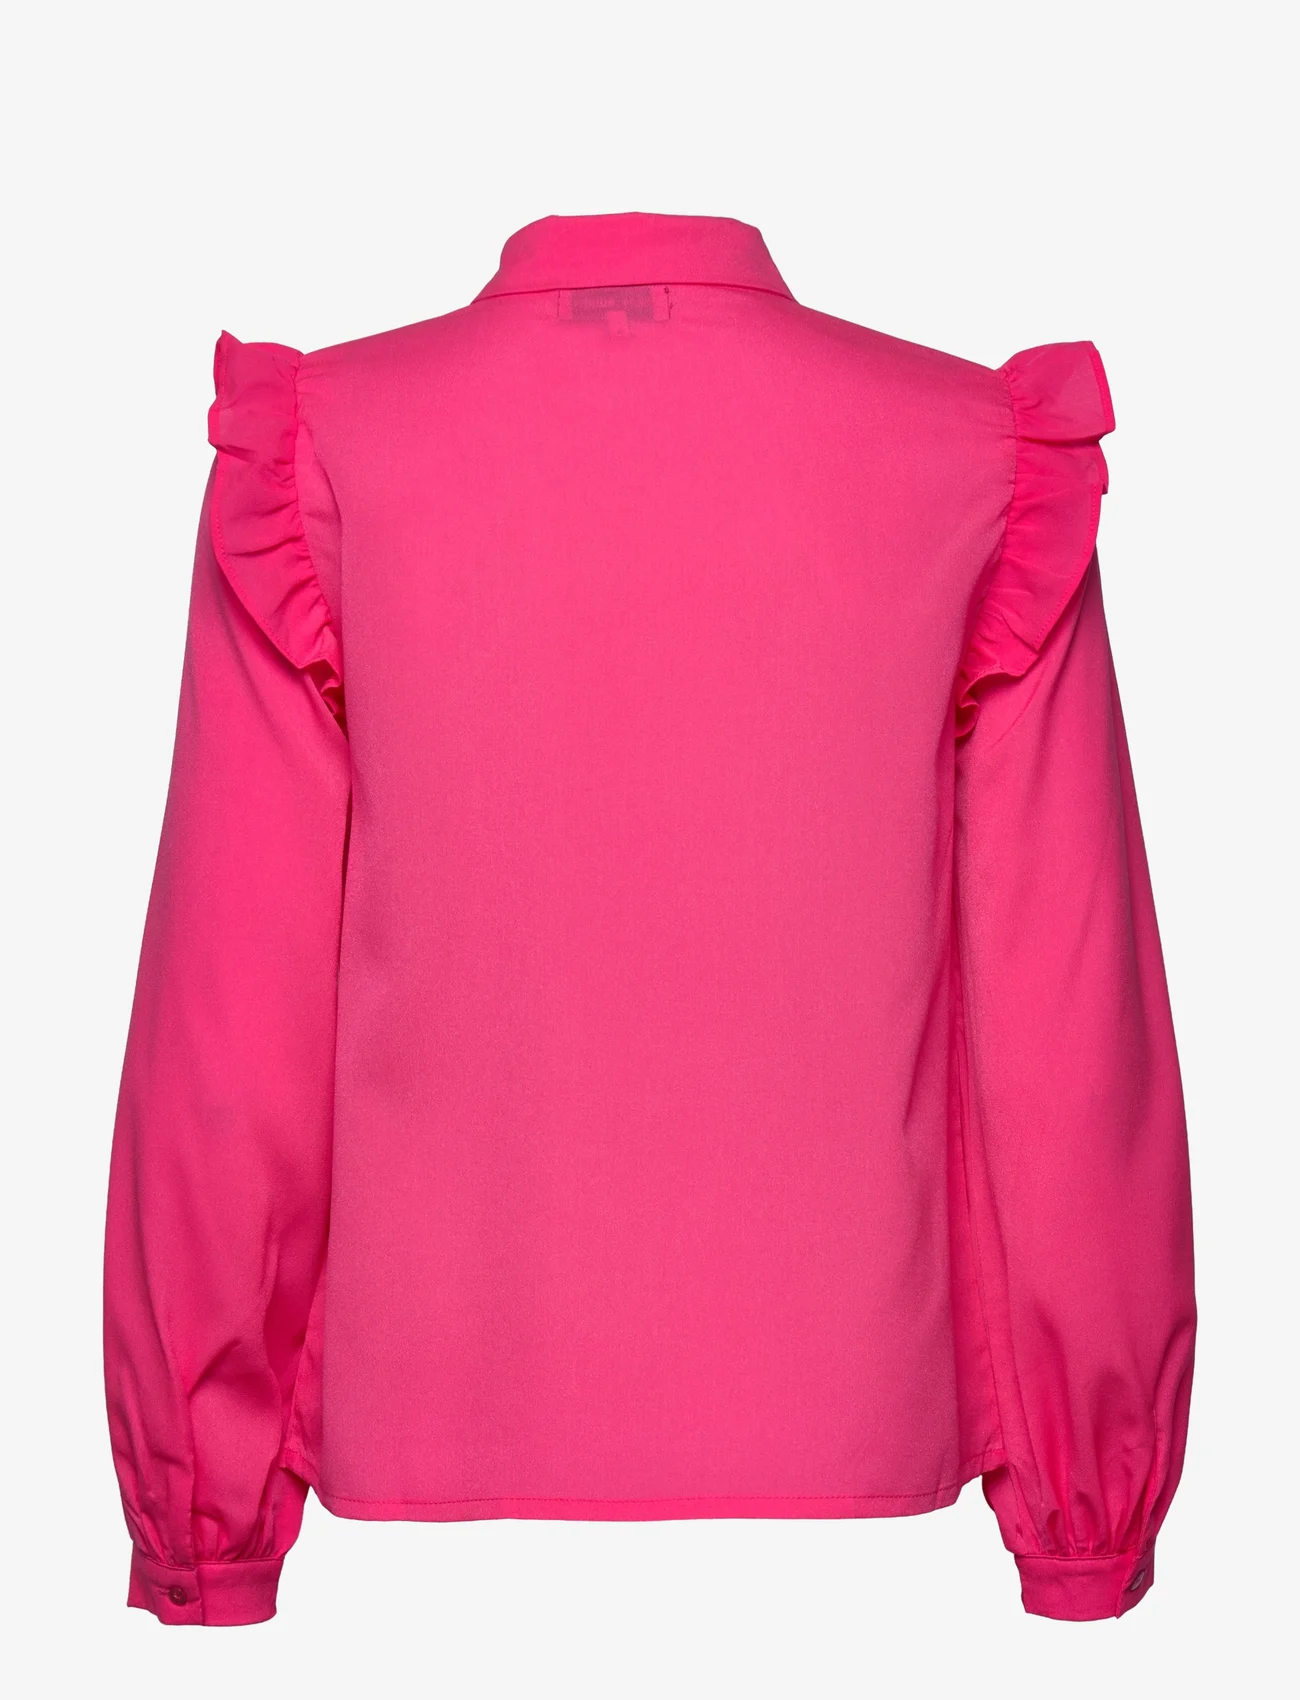 Lollys Laundry - Alexis Shirt - long-sleeved shirts - 98 neon pink - 1